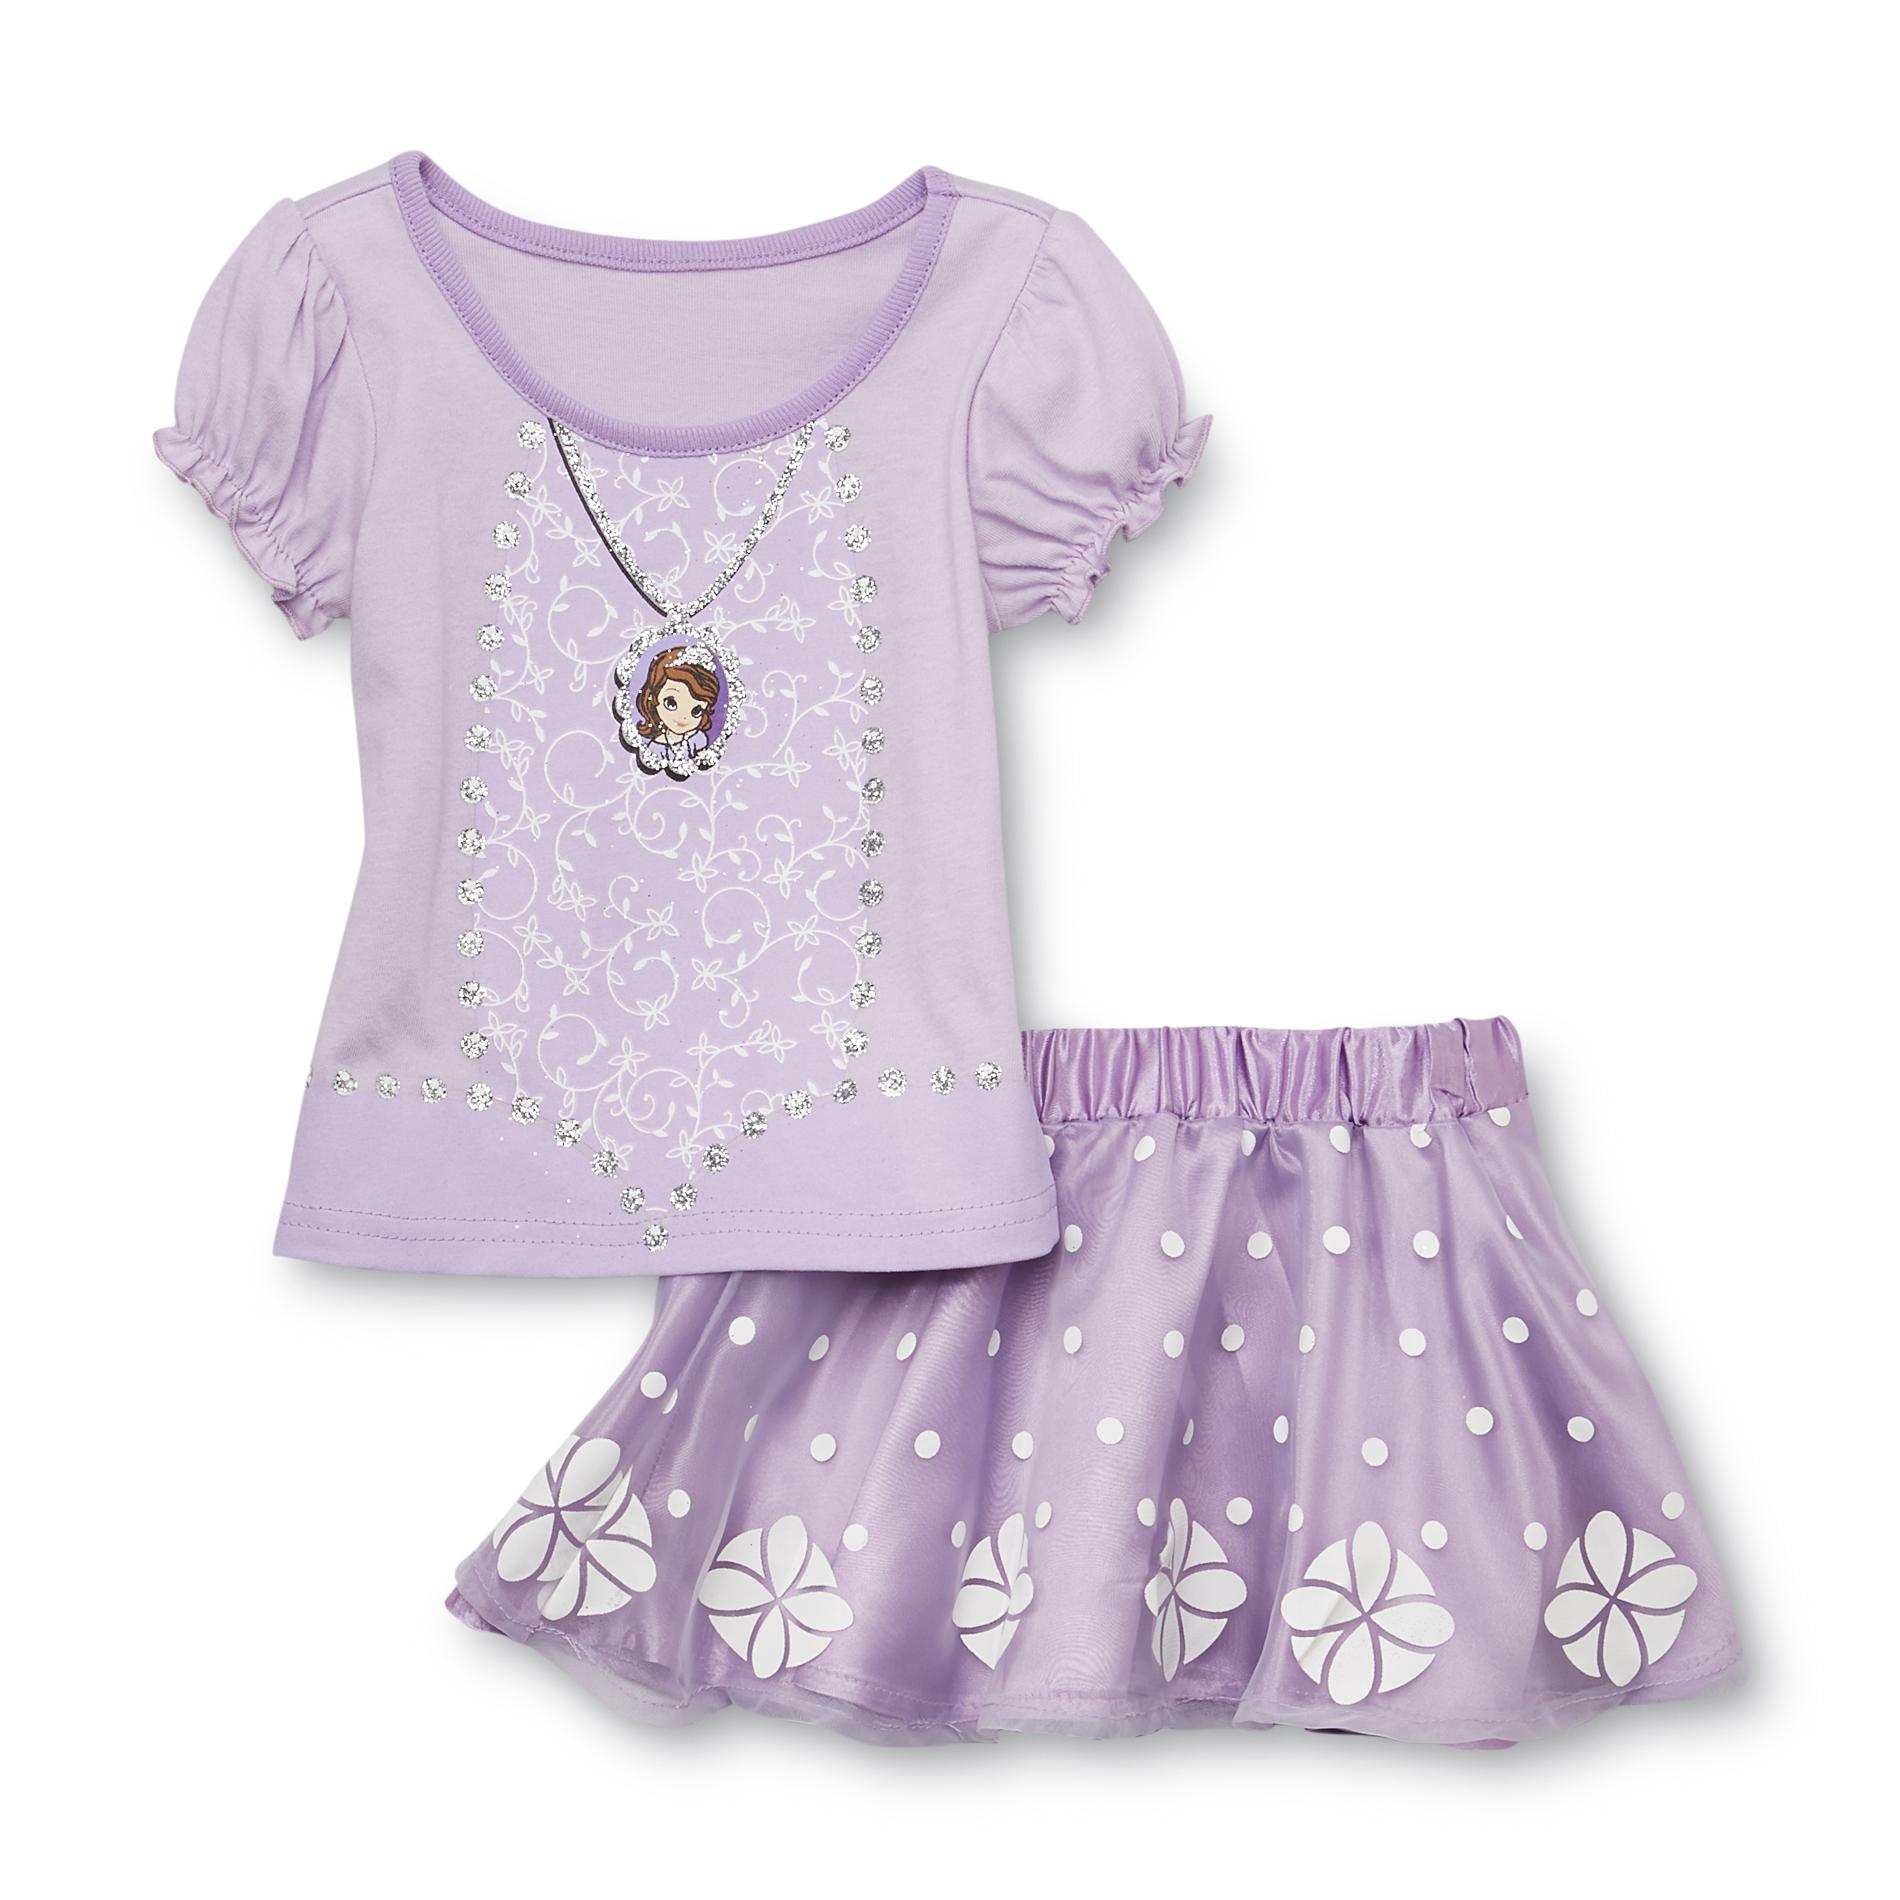 Disney Sofia the First Infant & Toddler Girl's Dress Up Skirt & Top